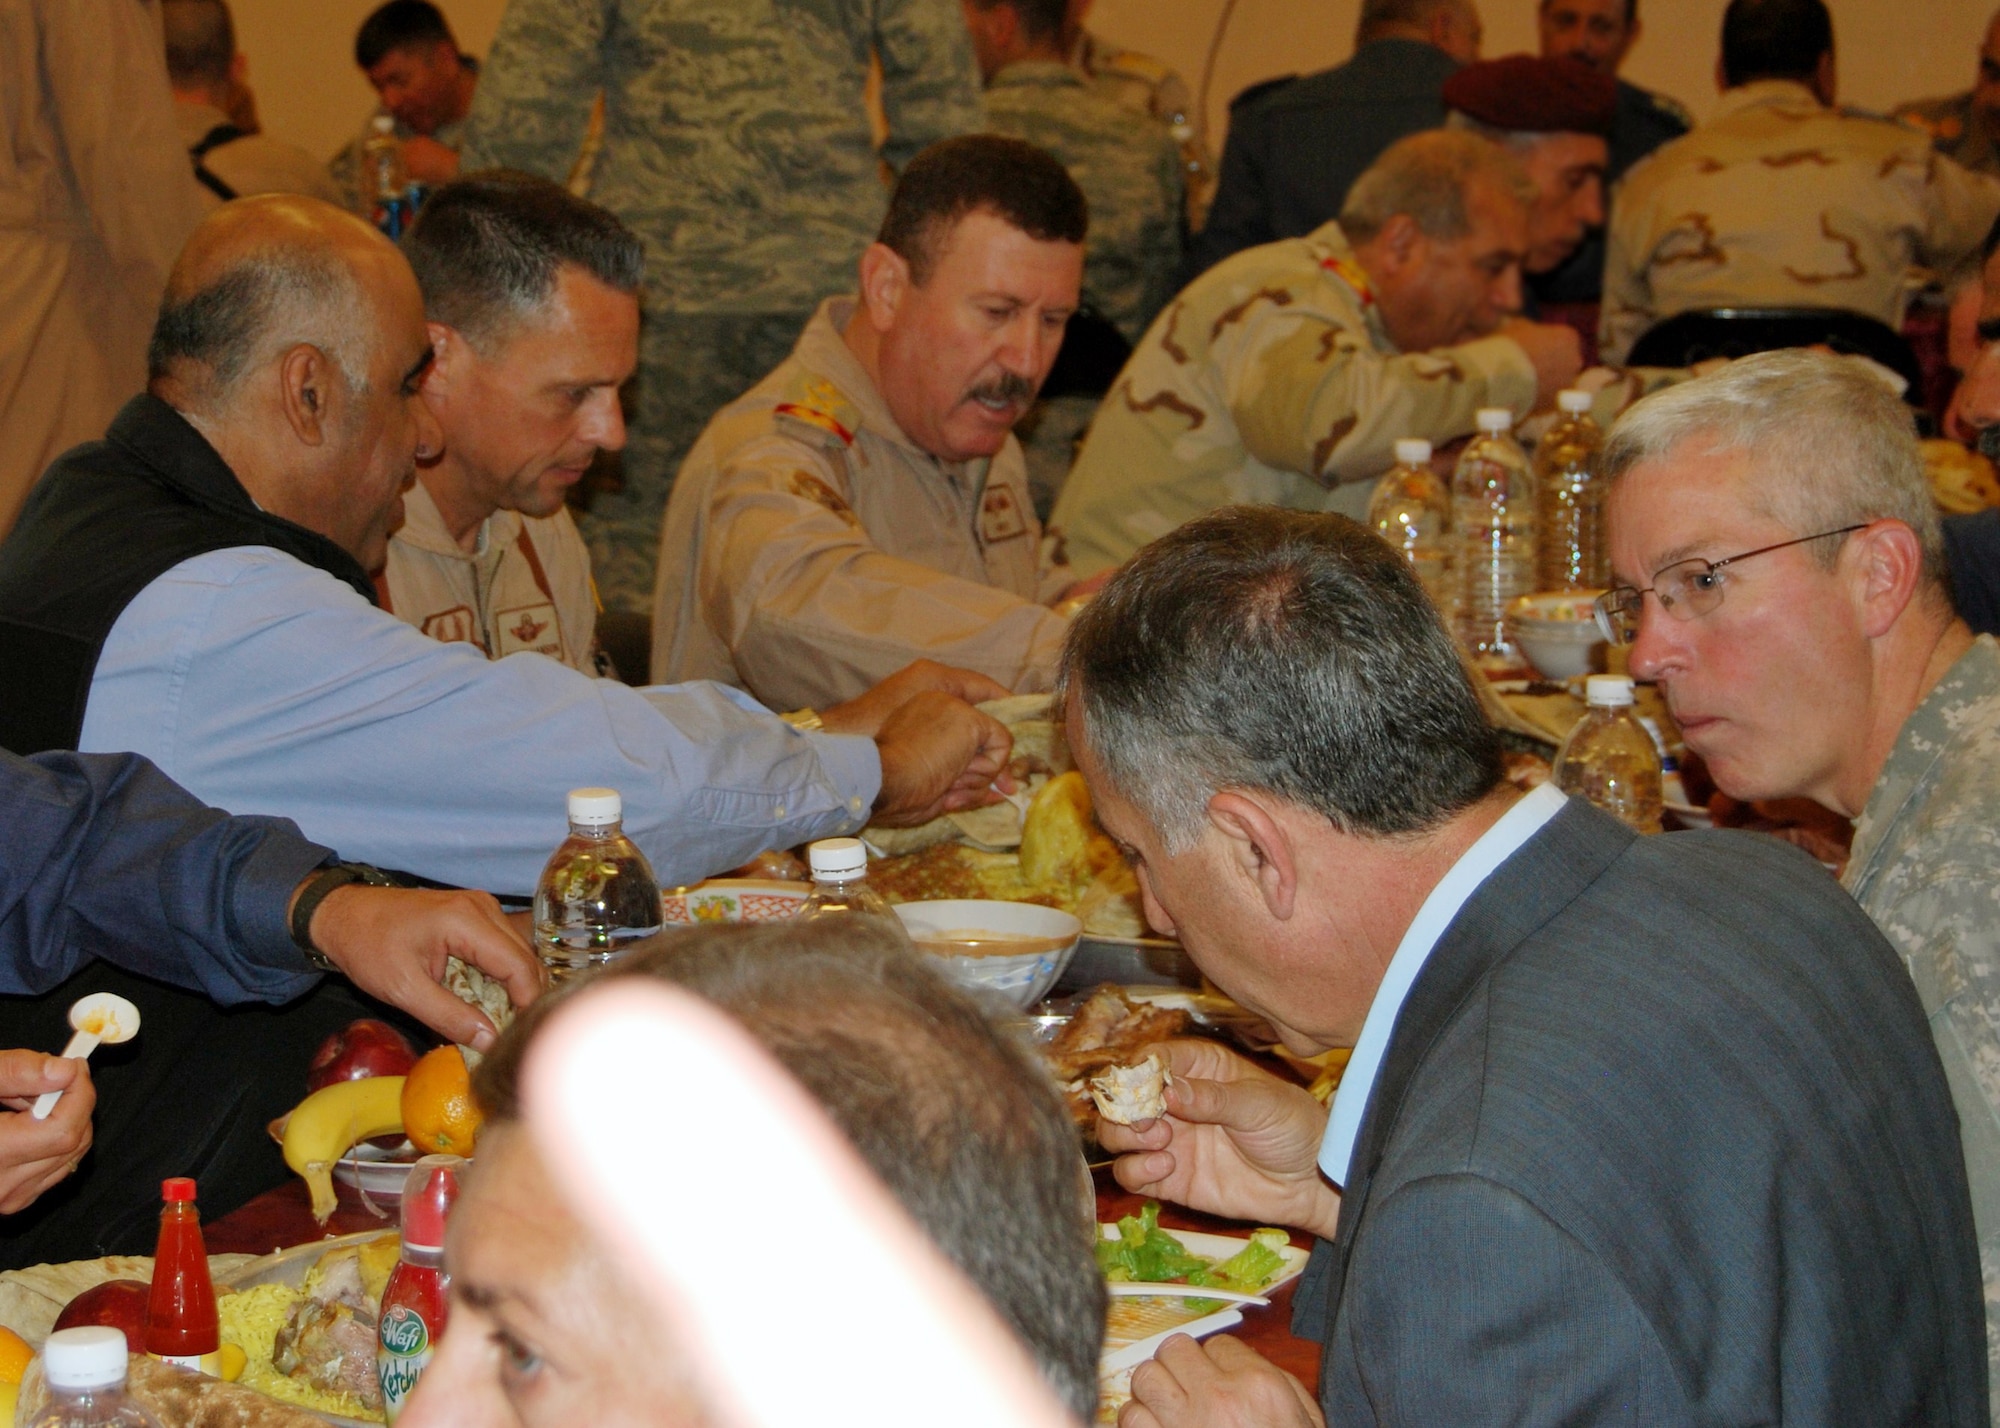 Brig. Gen. Scott Hanson, Commander of the 321st Air Expeditionary Wing and Director of Iraqi Training and Advisory Mission –  Air Force enjoys a traditional Iraqi meal with Staff Lt. Gen. Anwar, Iraqi Air Force Chief of Staff, after a ceremony at Ali Air Base, Iraq, which was designed to celebrate the arrival of the Iraqi Air Force's Squadron 70 and the grand opening of their new dining facility.  Squadron 70 moved to Ali Base Oct. 17 from Basra. Since the move, Squadron 70 has provided surveillance and reconnaissance support of the Hajj, provided ISR support for Iraqi Security Forces and secured Iraqi’s vital infrastructure and borders. (U.S. Air Force photo by Staff Sgt. Eric Donner)